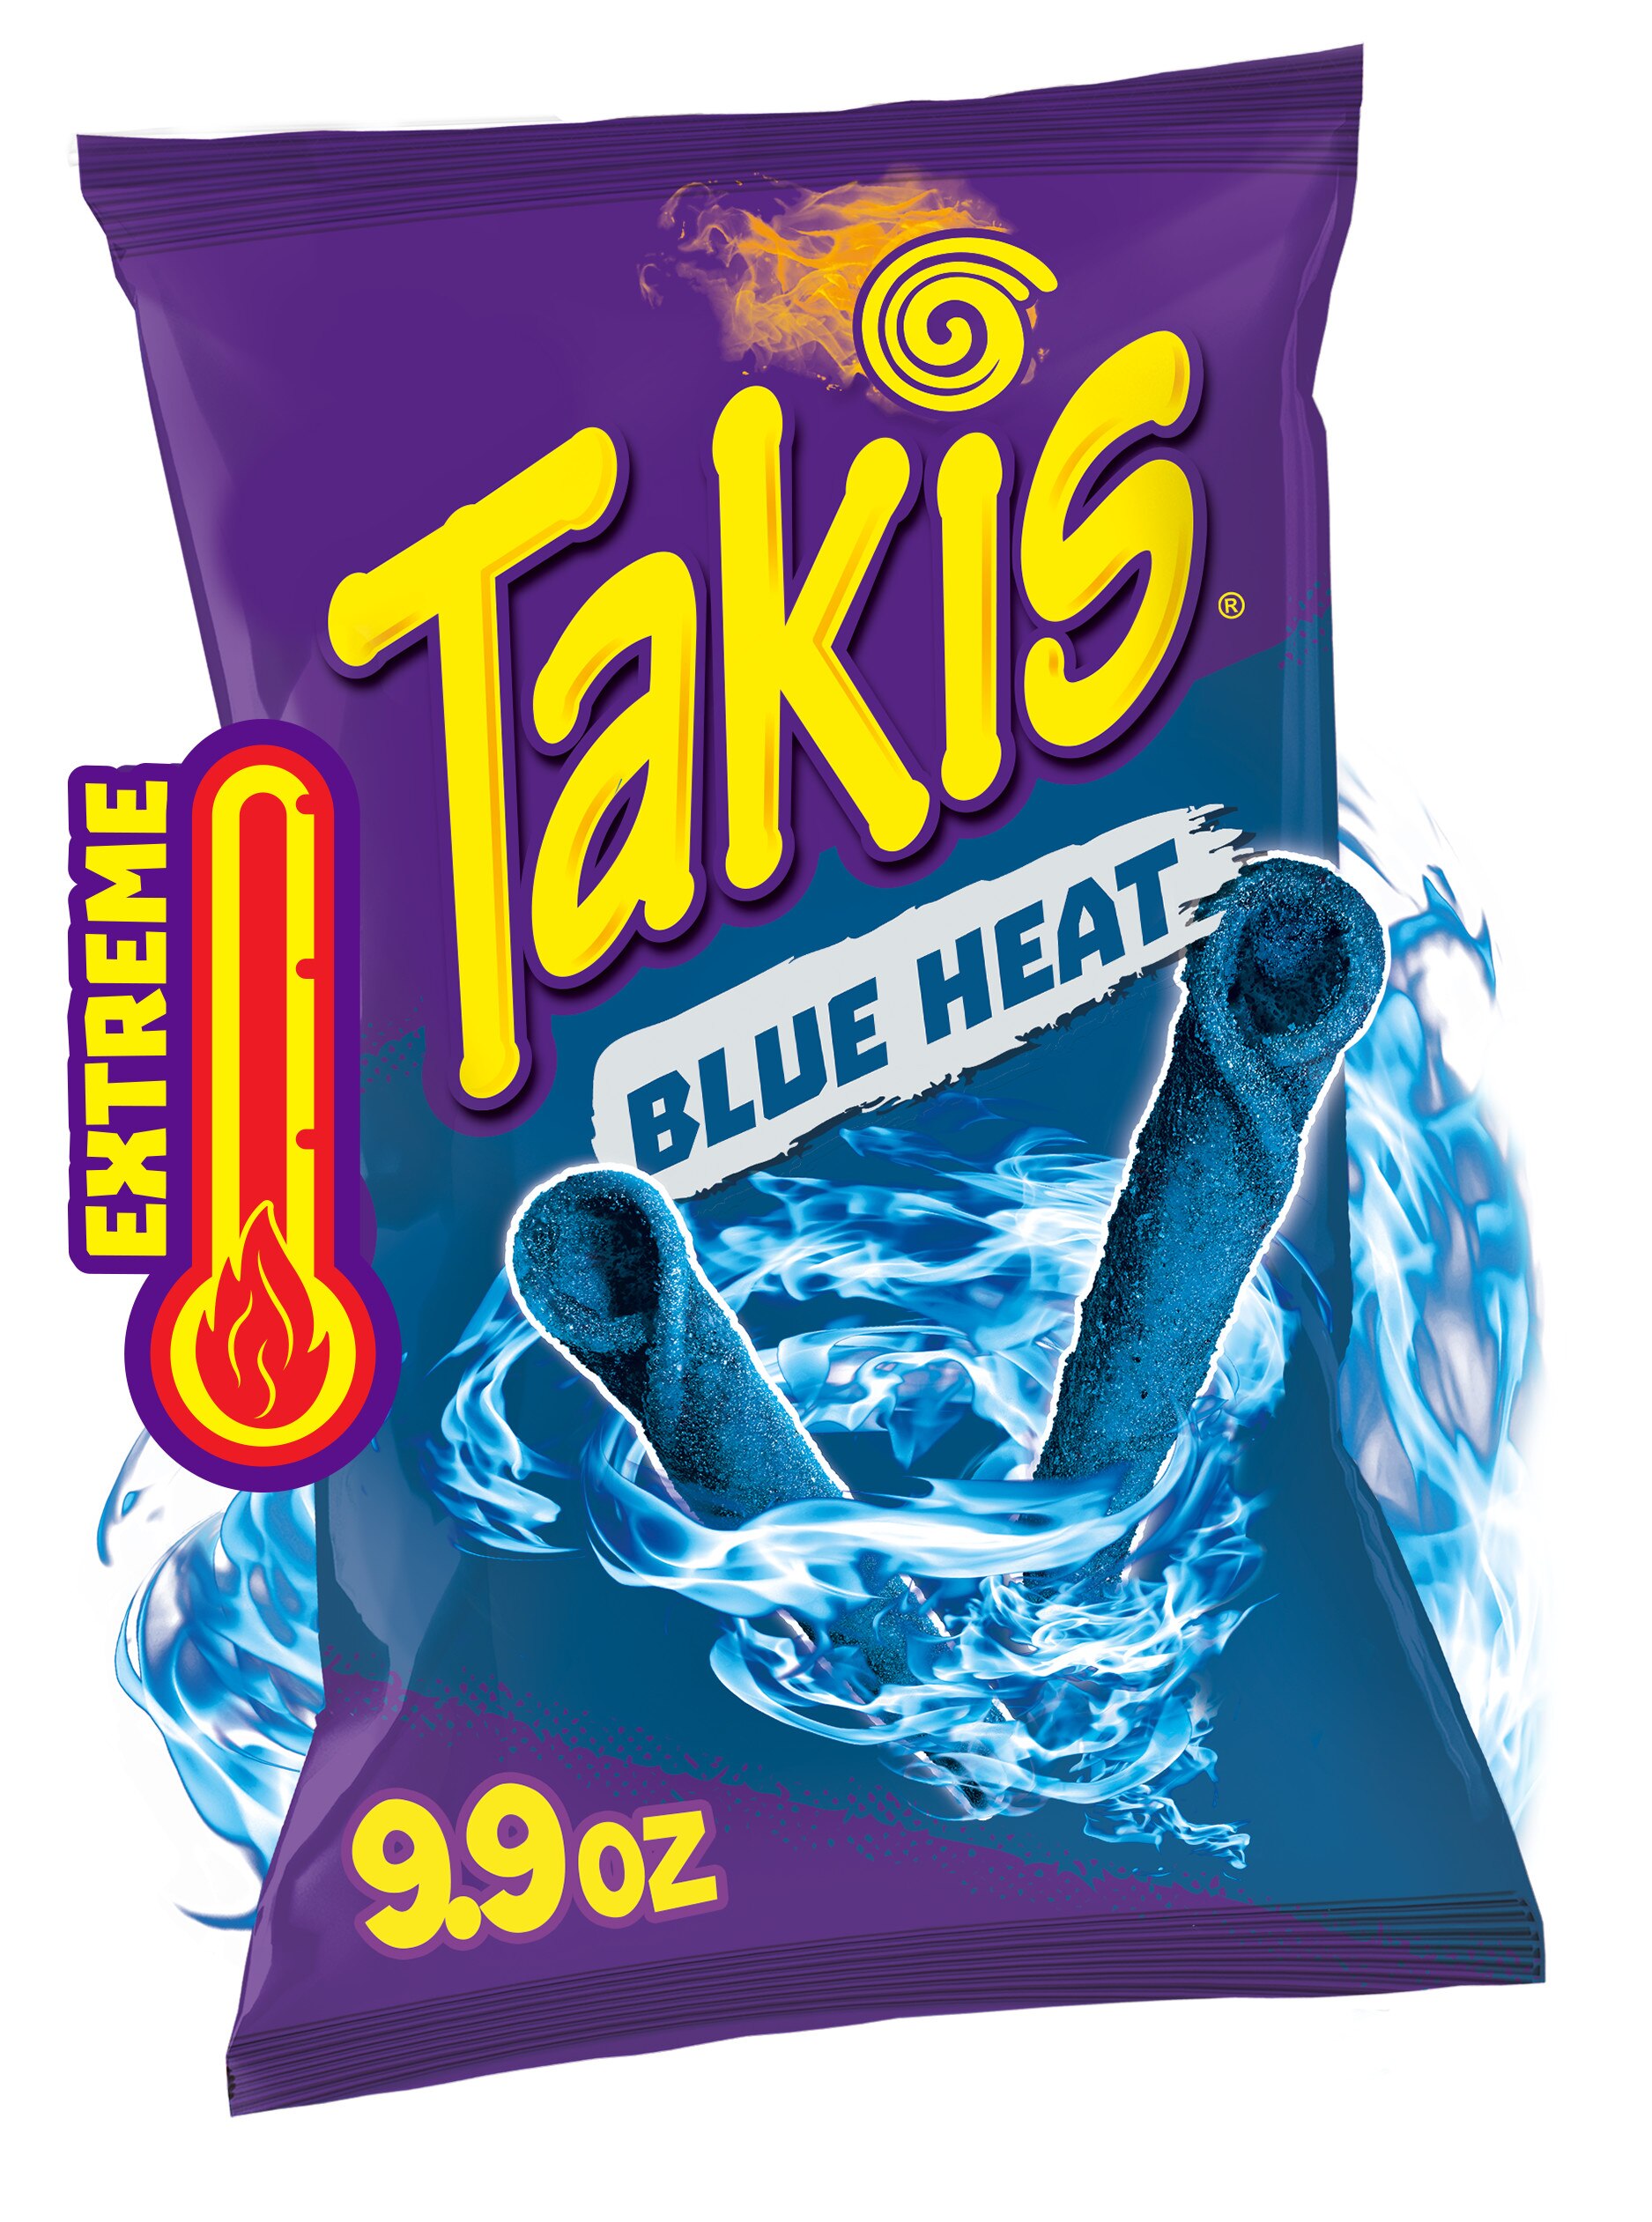 Takis Blue Heat Rolls  Hot Chili Pepper Flavored Spicy Tortilla Chips, 9.9 oz